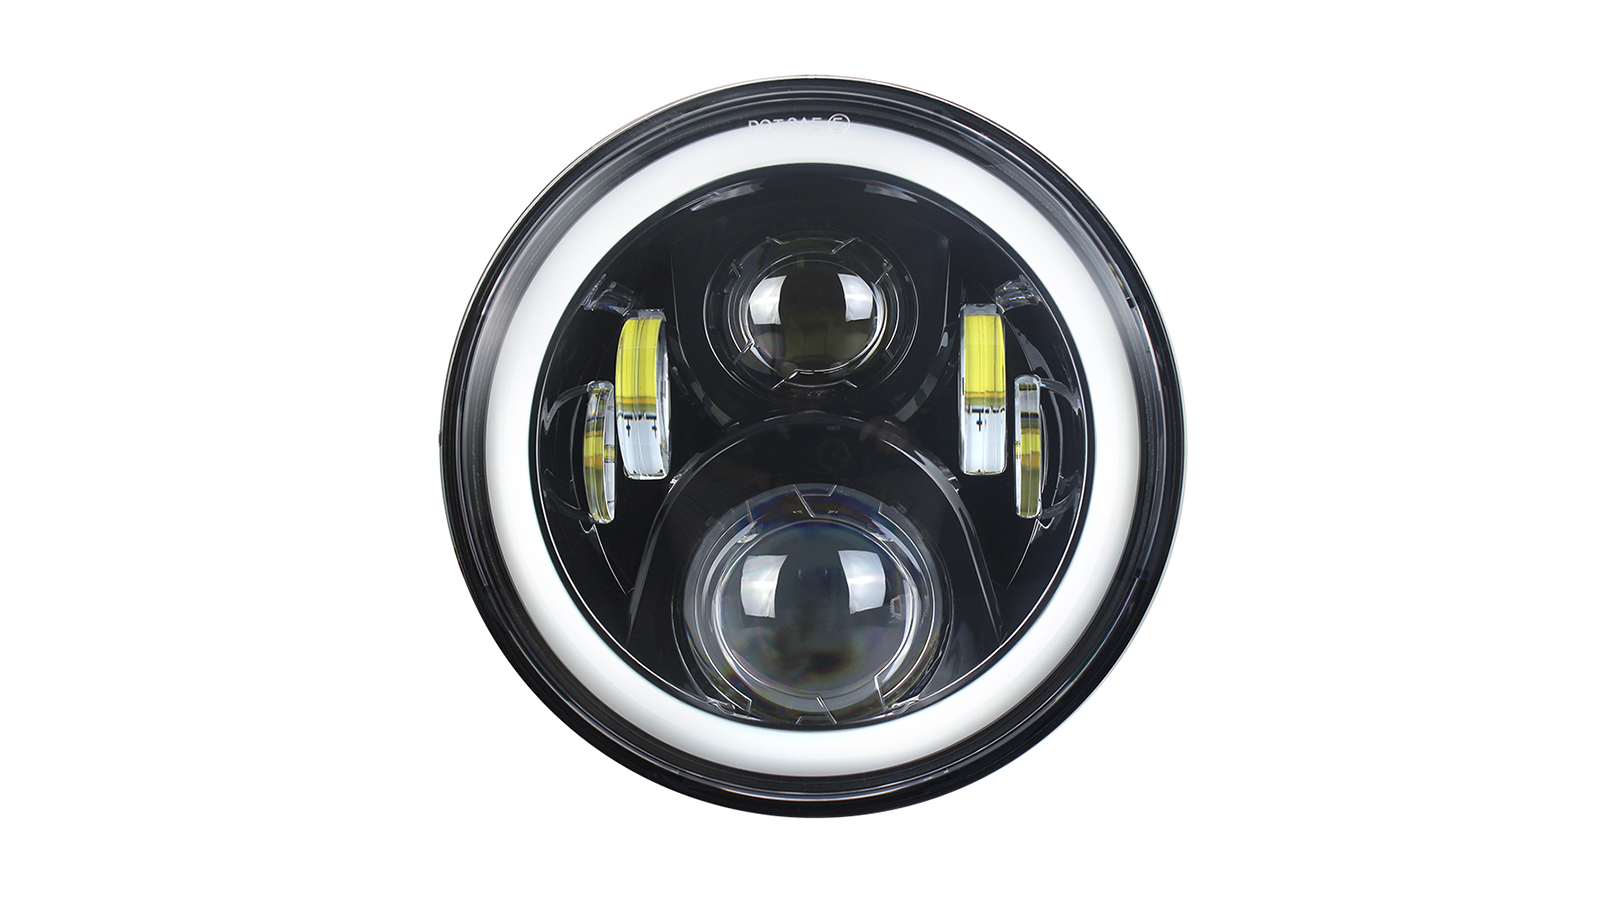 LED Headlight Hot Selling Motorcycle New with Flash Waterproof Highlighting Universal Motorcycle LED Headlight